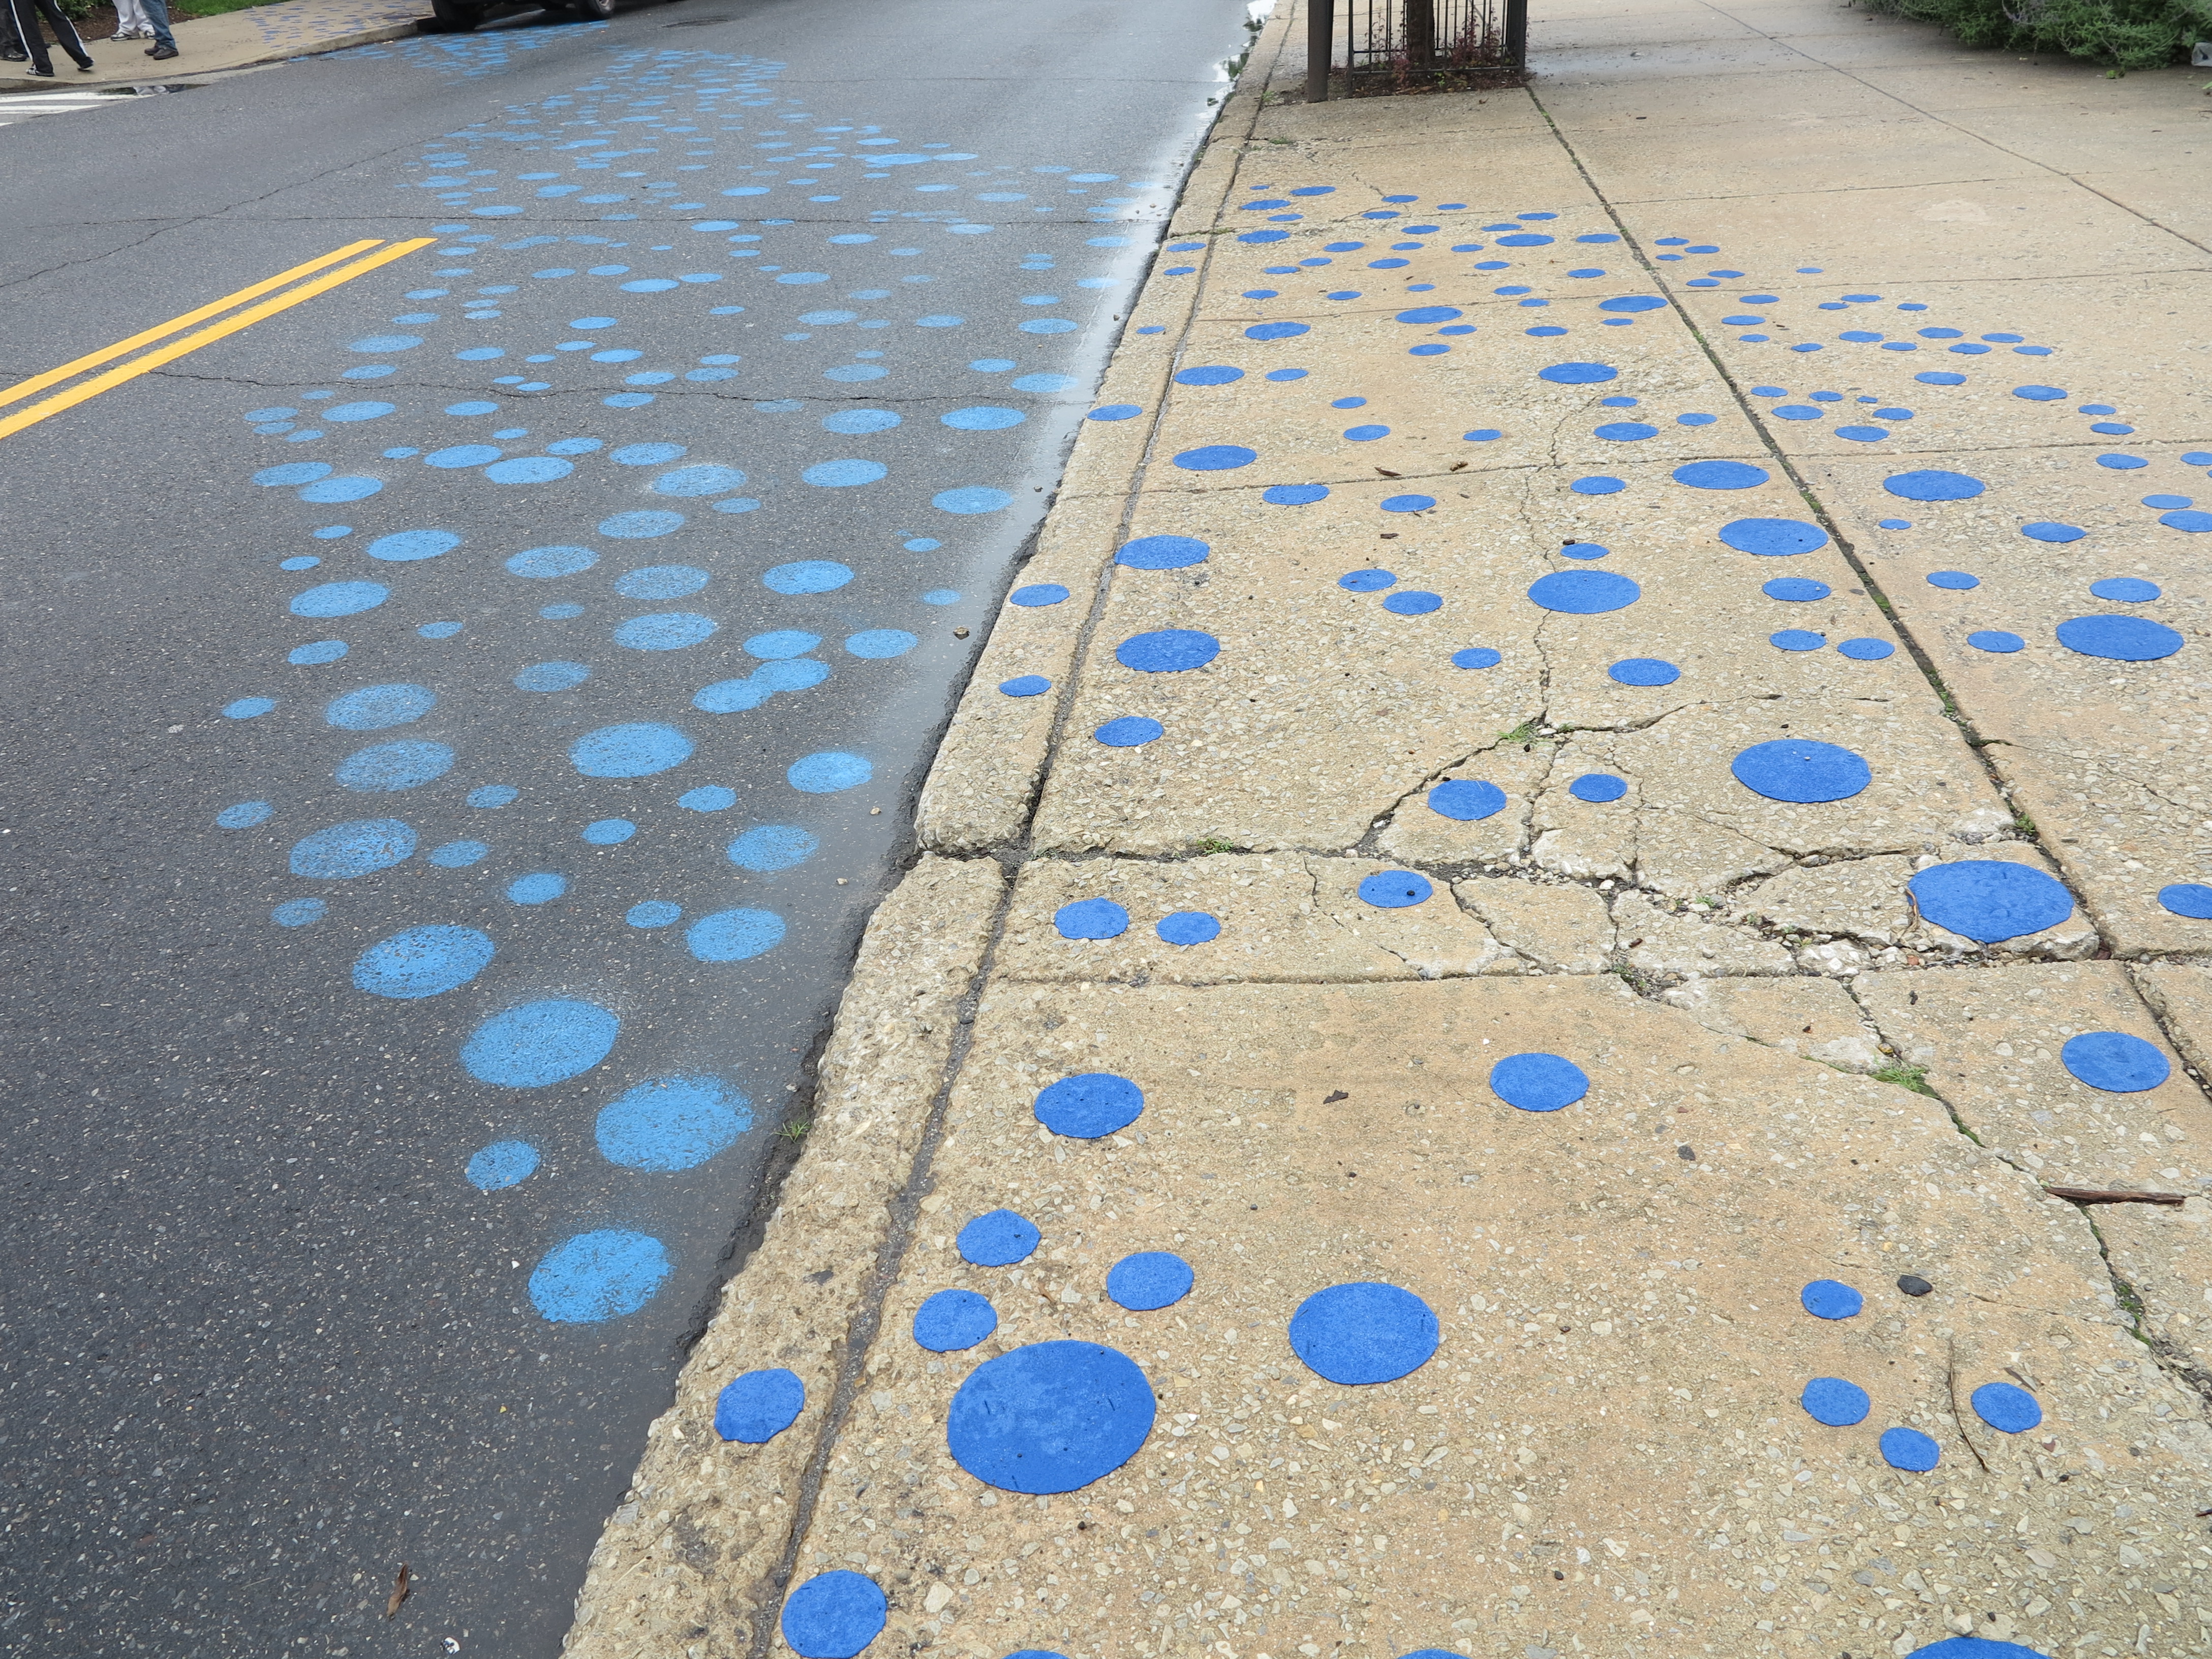 Dots were painted on the street using surveyor's paint and dots on the sidewalk were adhered using a torch.